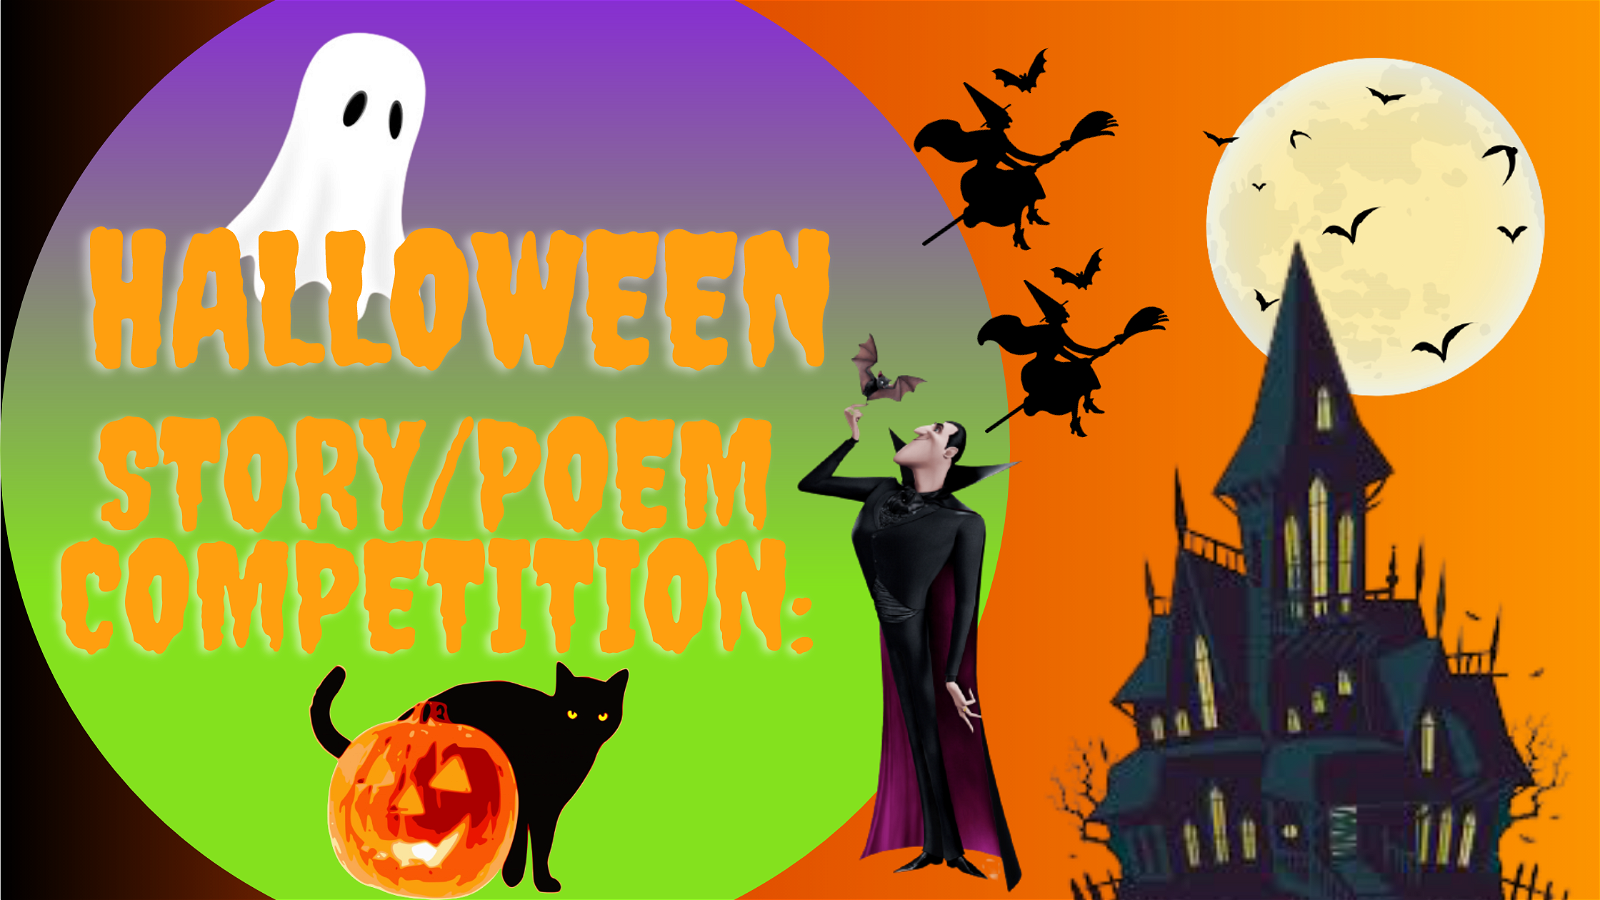 Halloween: Story/Poem Competition